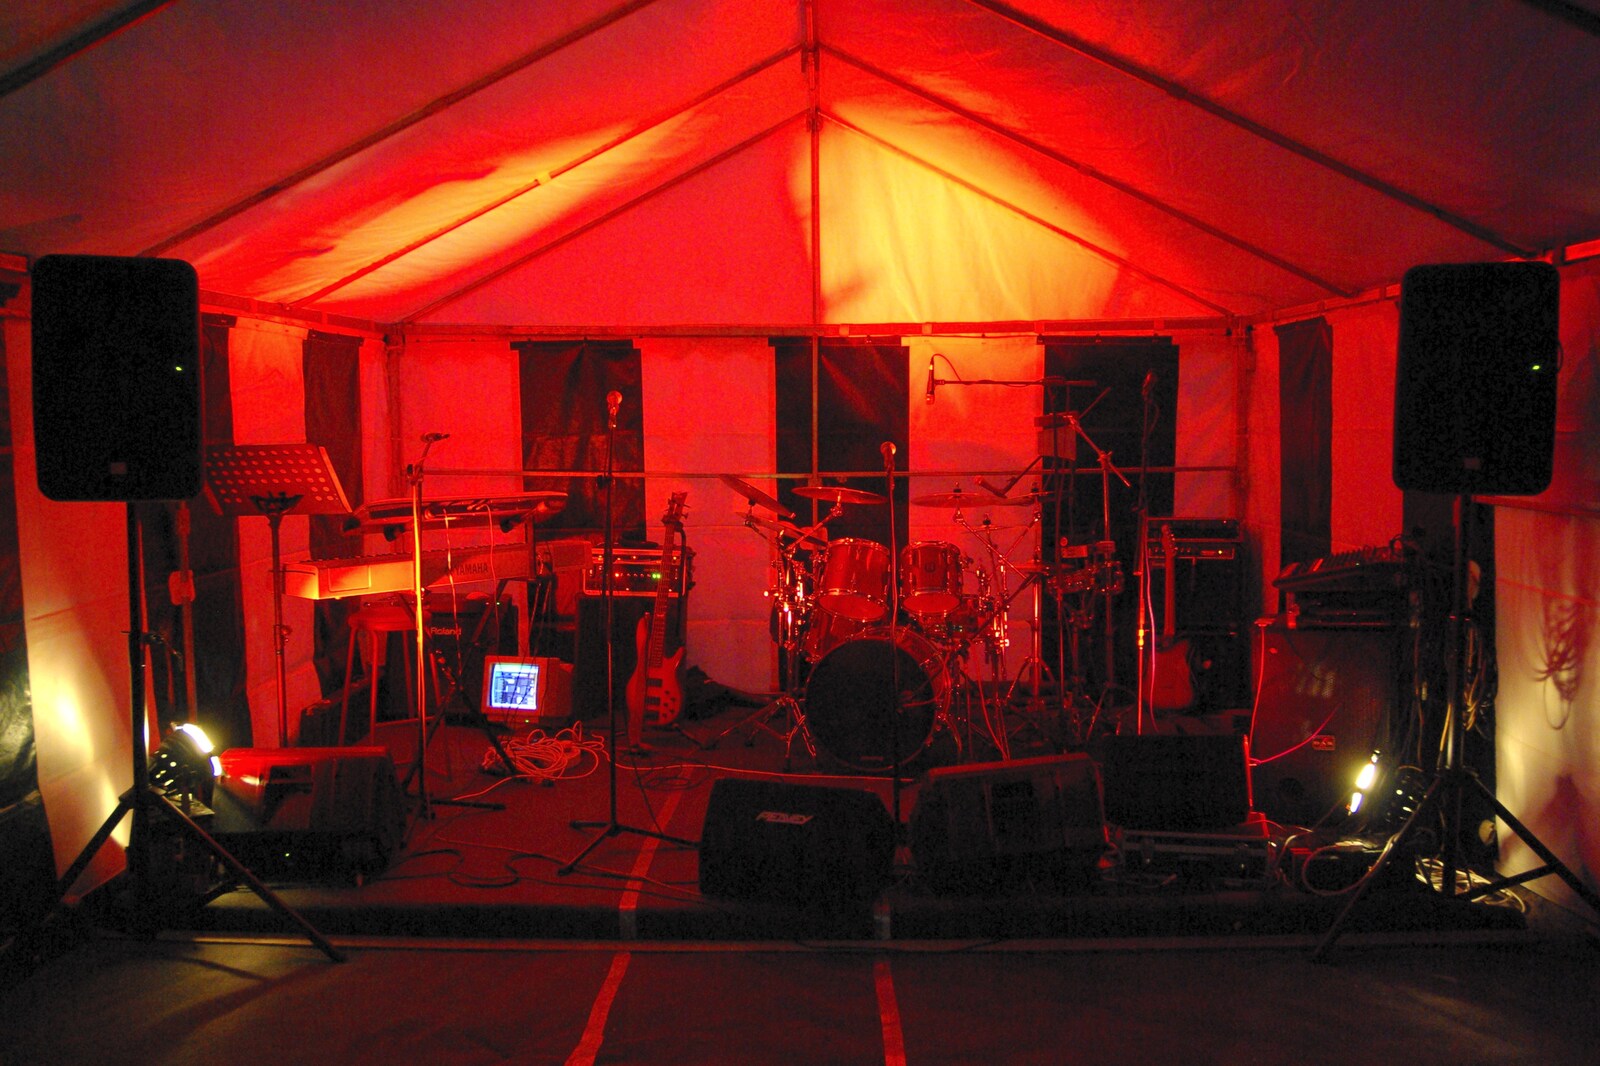 The Opening of Eye Skateboard Park, and The BBs at Cotton, Suffolk - 5th August 2007: Our stage is set